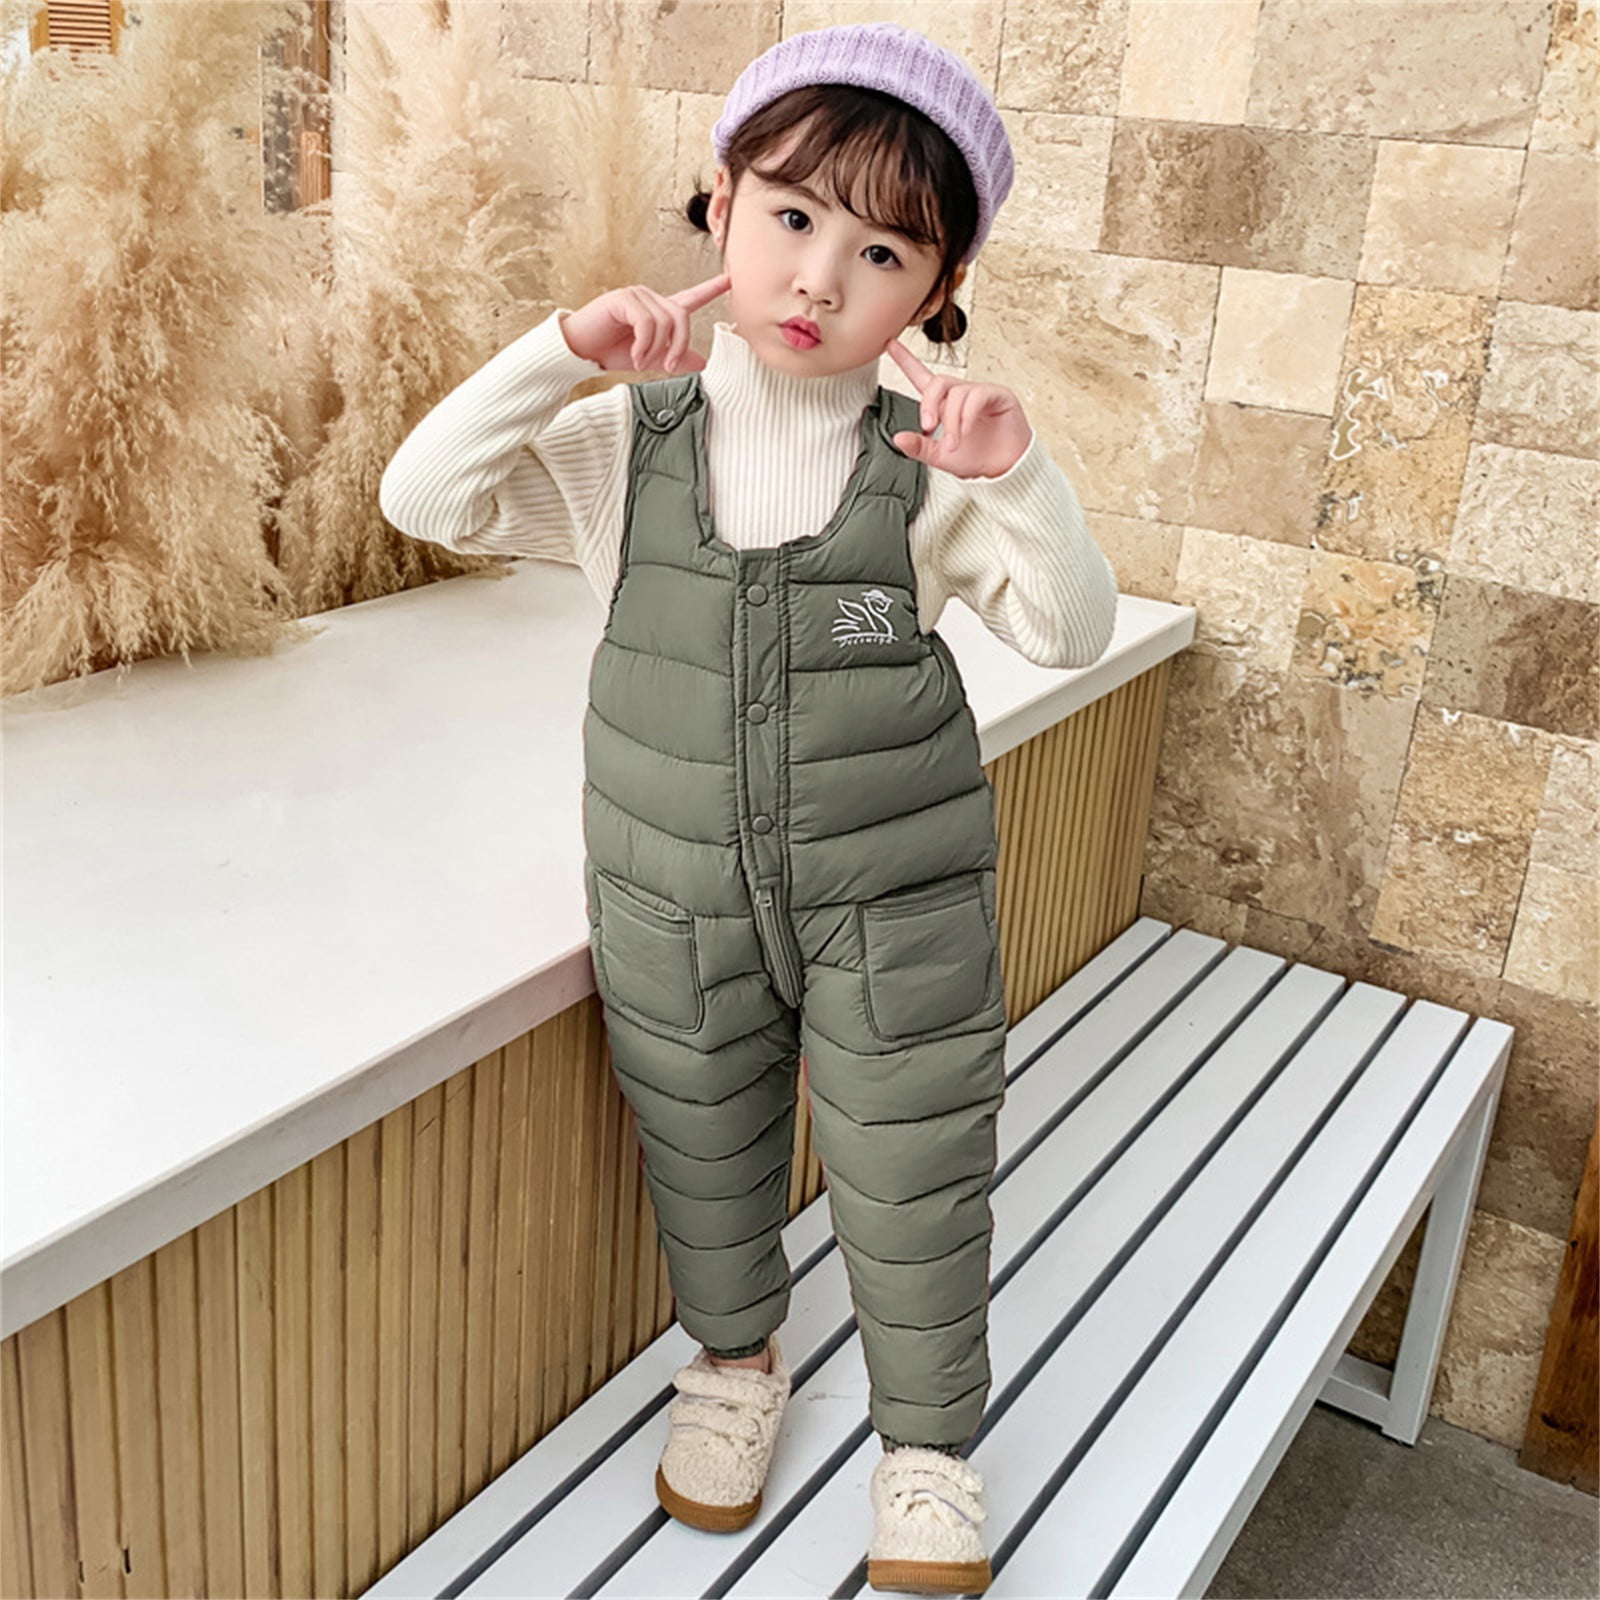 NKOOGH Side Snap Bodysuit Baby 18 Month Zip Up Romper Children Kids Toddler  Toddler Baby Boys Girls Sleeveless Winter Warm Shiny Jumpsuit Cotton Wadded  Suspender Ski Bib Pants Overalls Trousers Outfit 